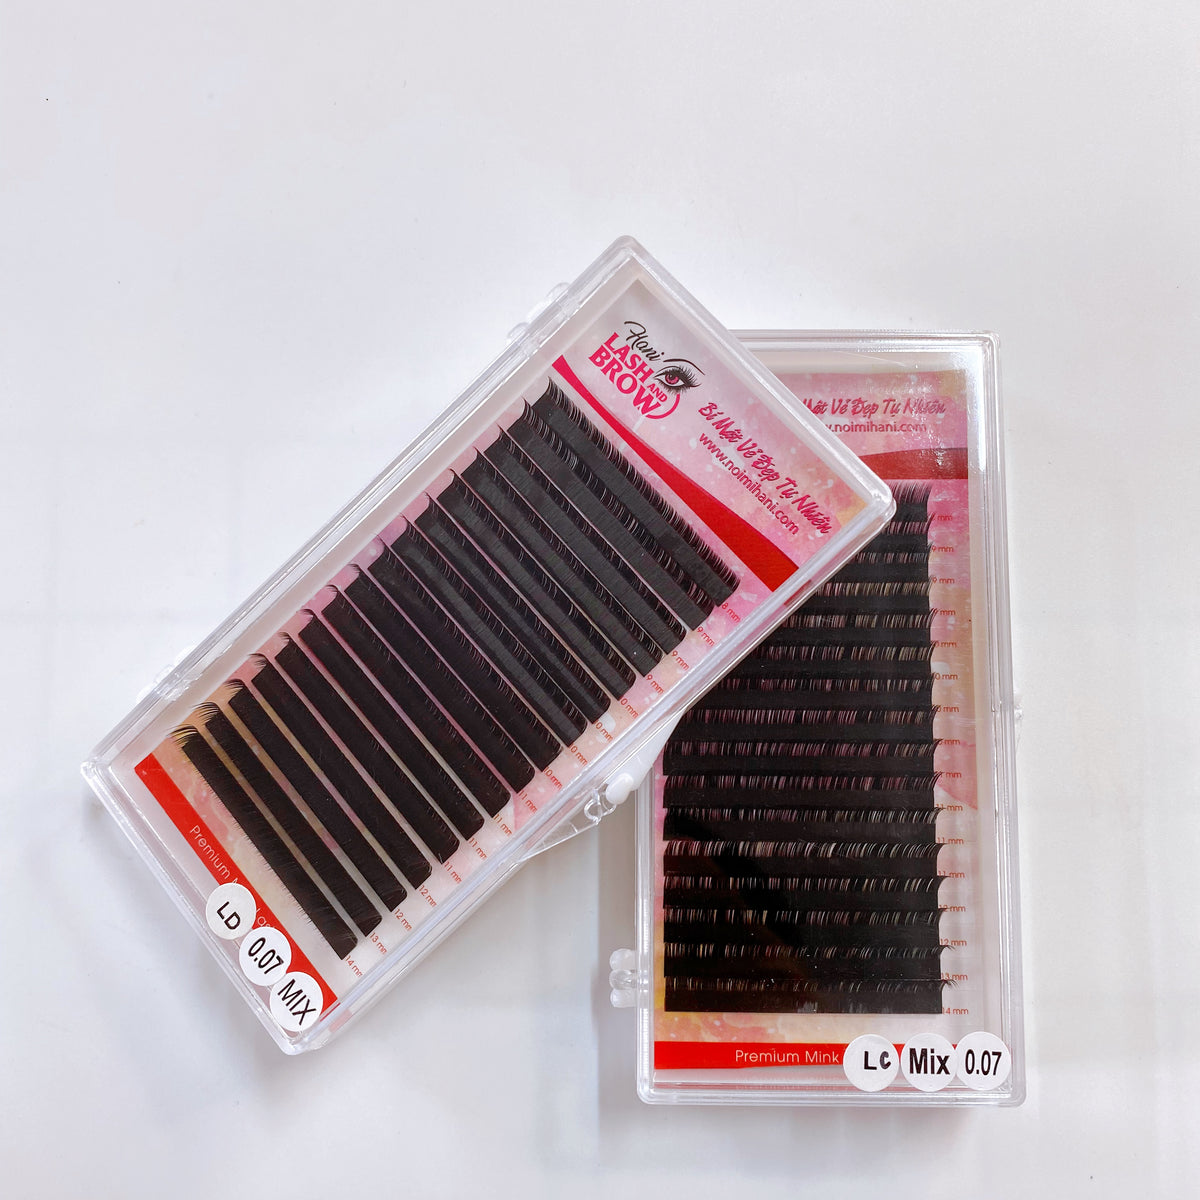 Double Fast Volume Super Mink Lashes - LC, LD